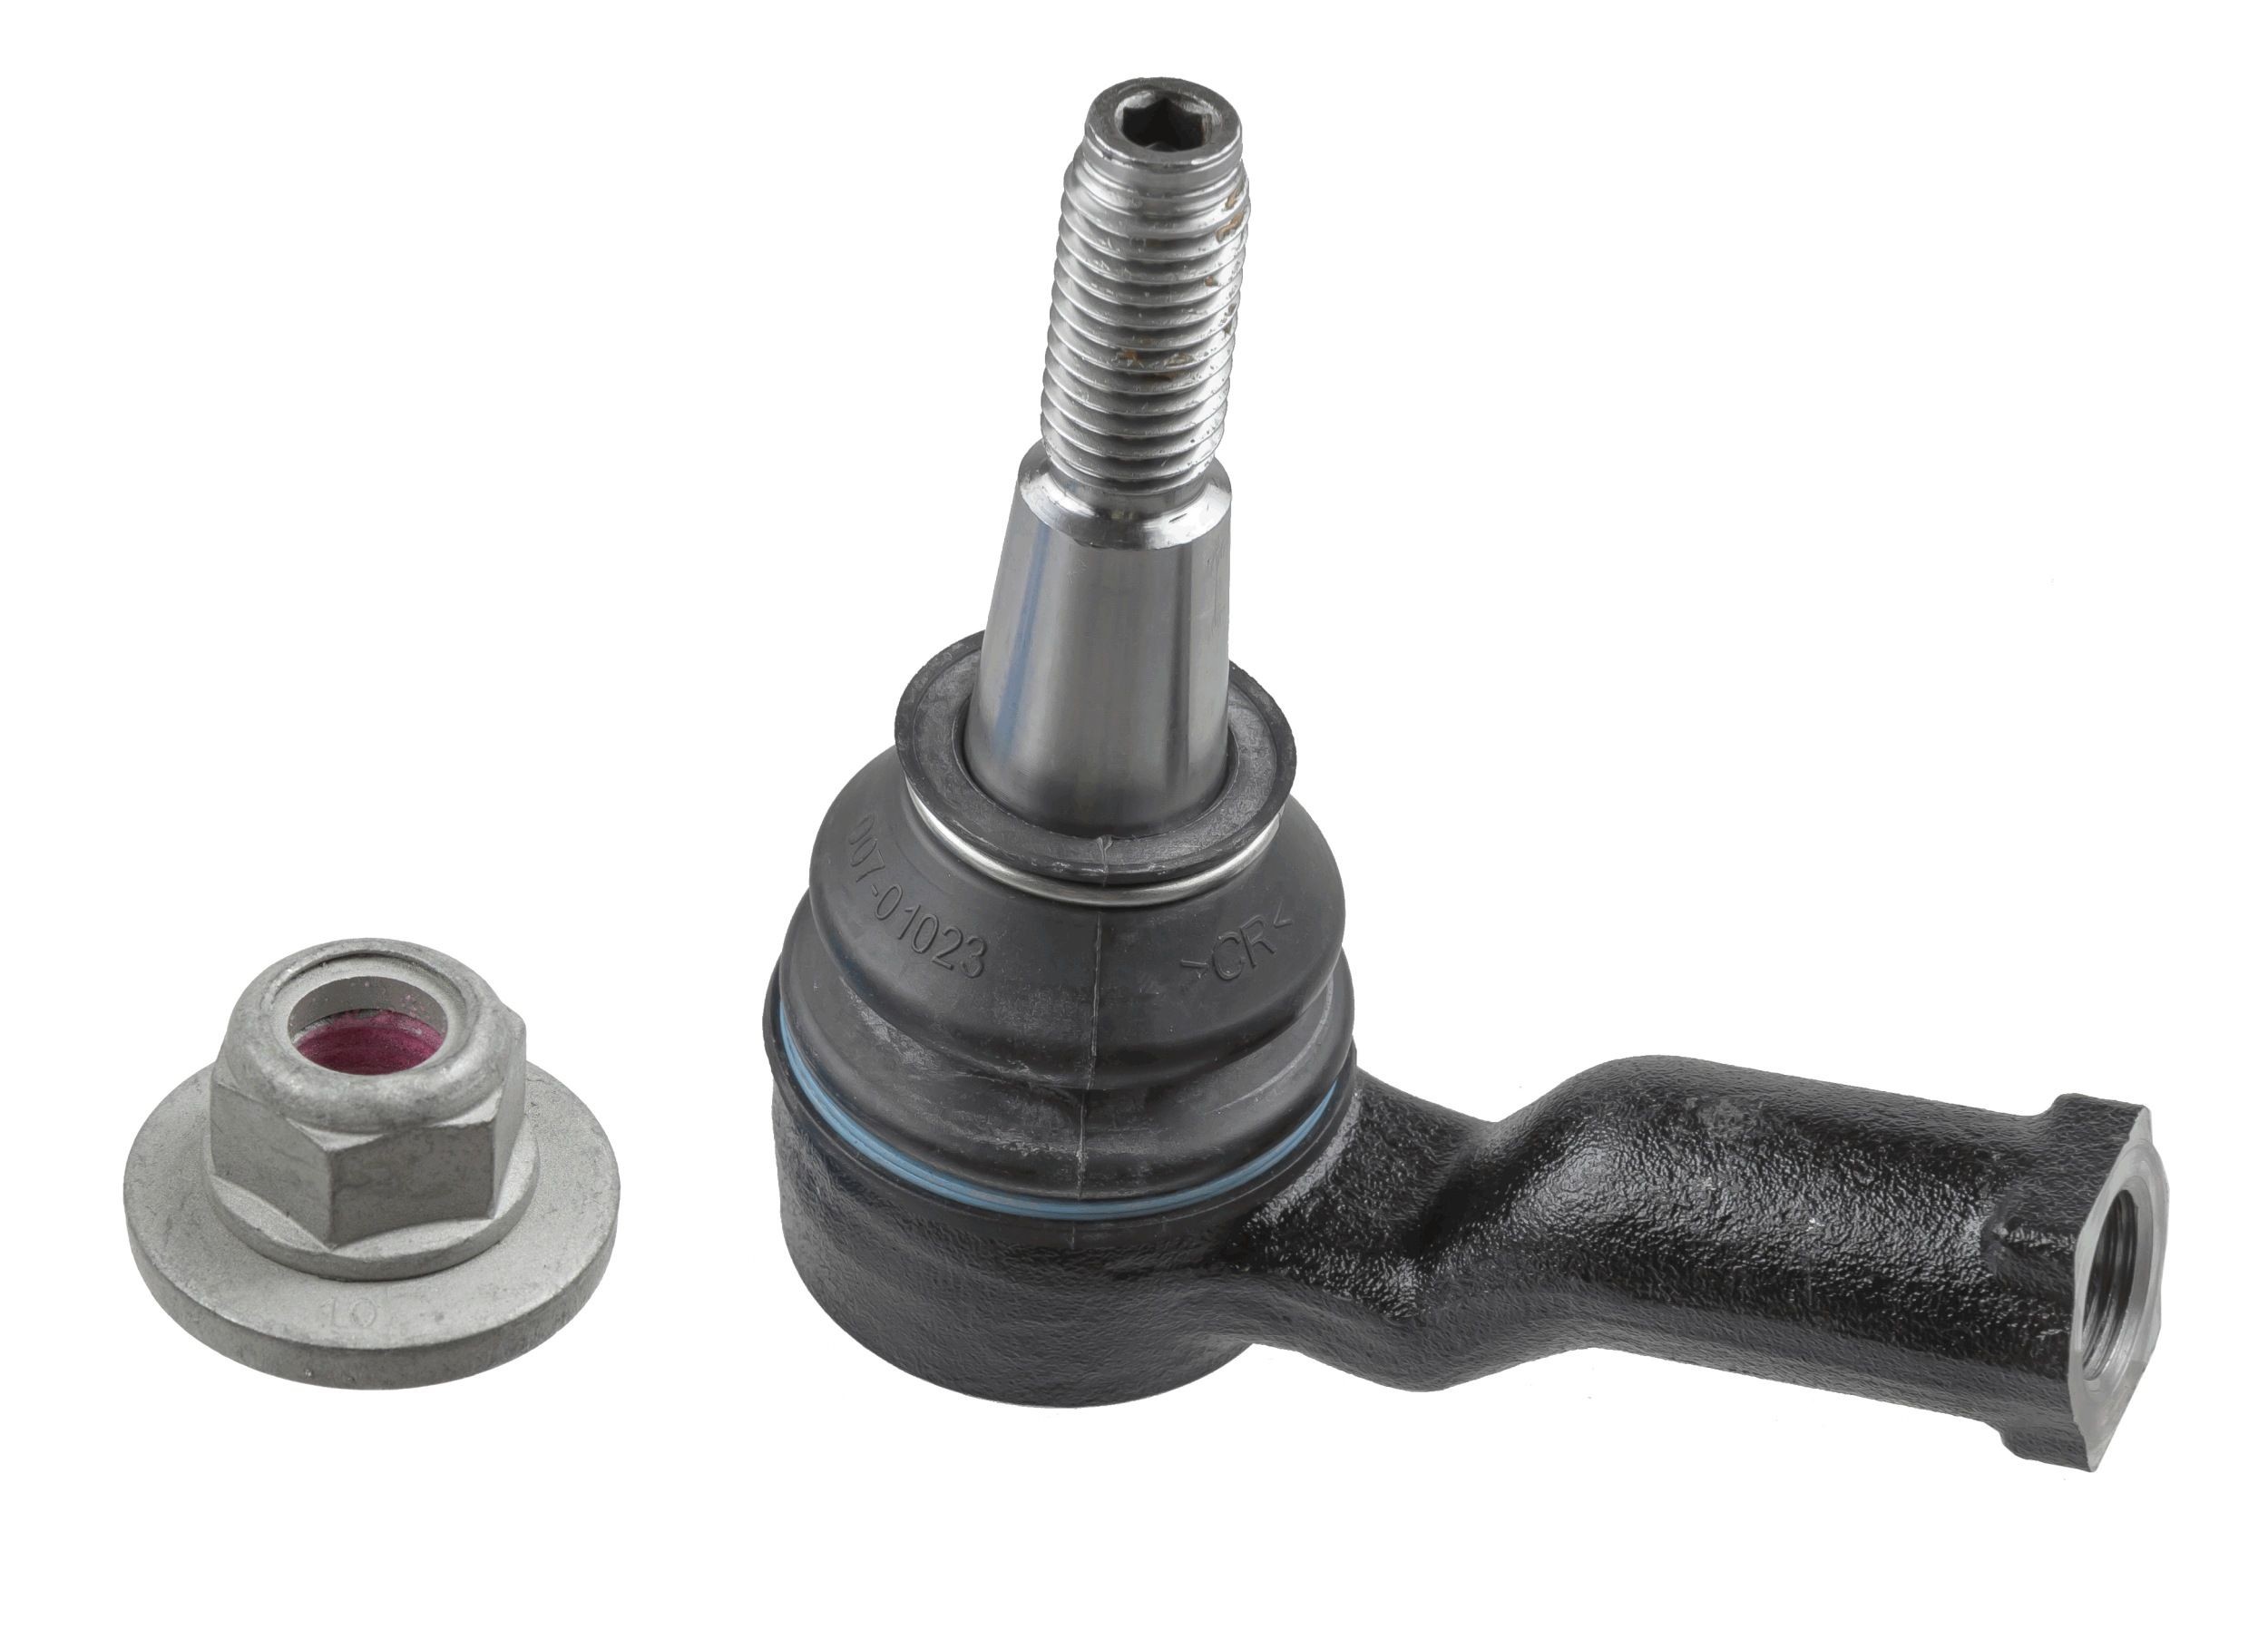 LEMFÖRDER 34408 01 Track rod end Cone Size 22 mm, M14x2 mm, Front Axle, both sides, outer